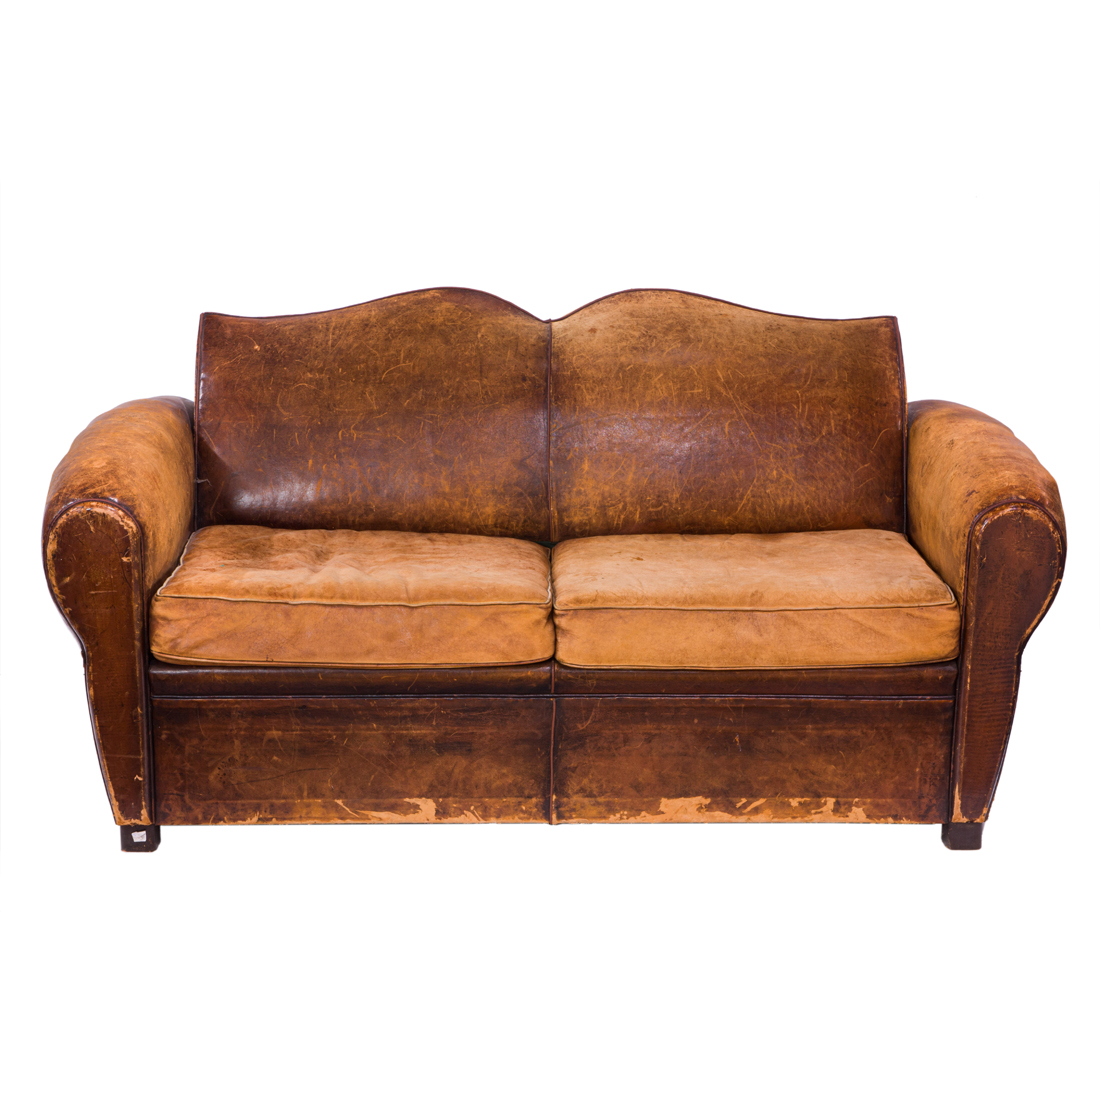 AN ART DECO LEATHER TWO-SEAT SOFA